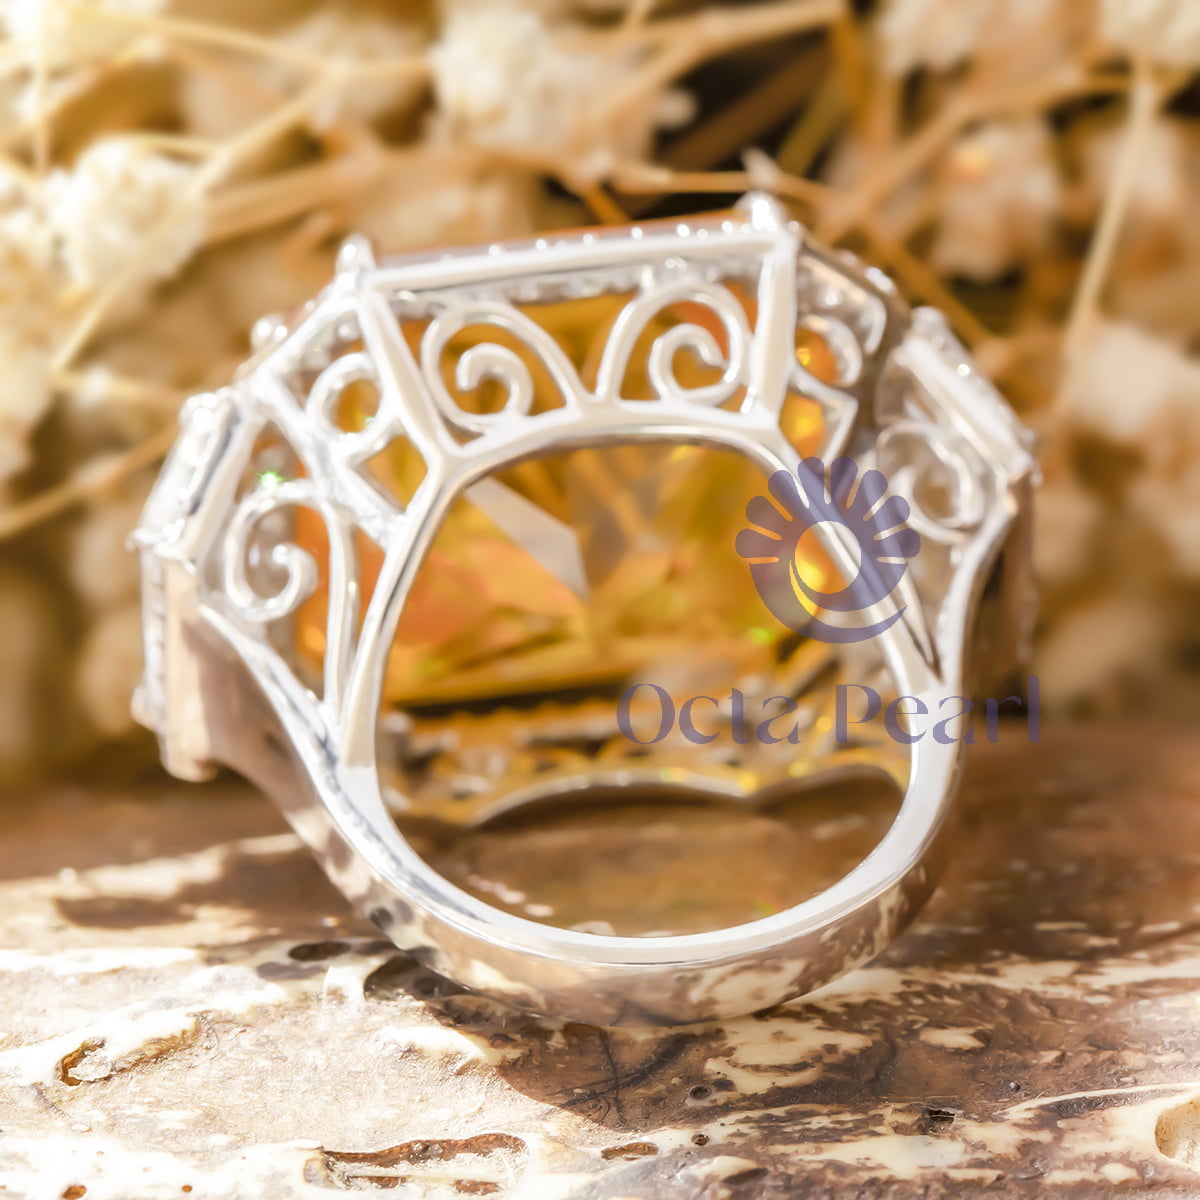 Canary Yellow Radiant & Baguette CZ Three Stone Halo Cocktail Wedding Ring